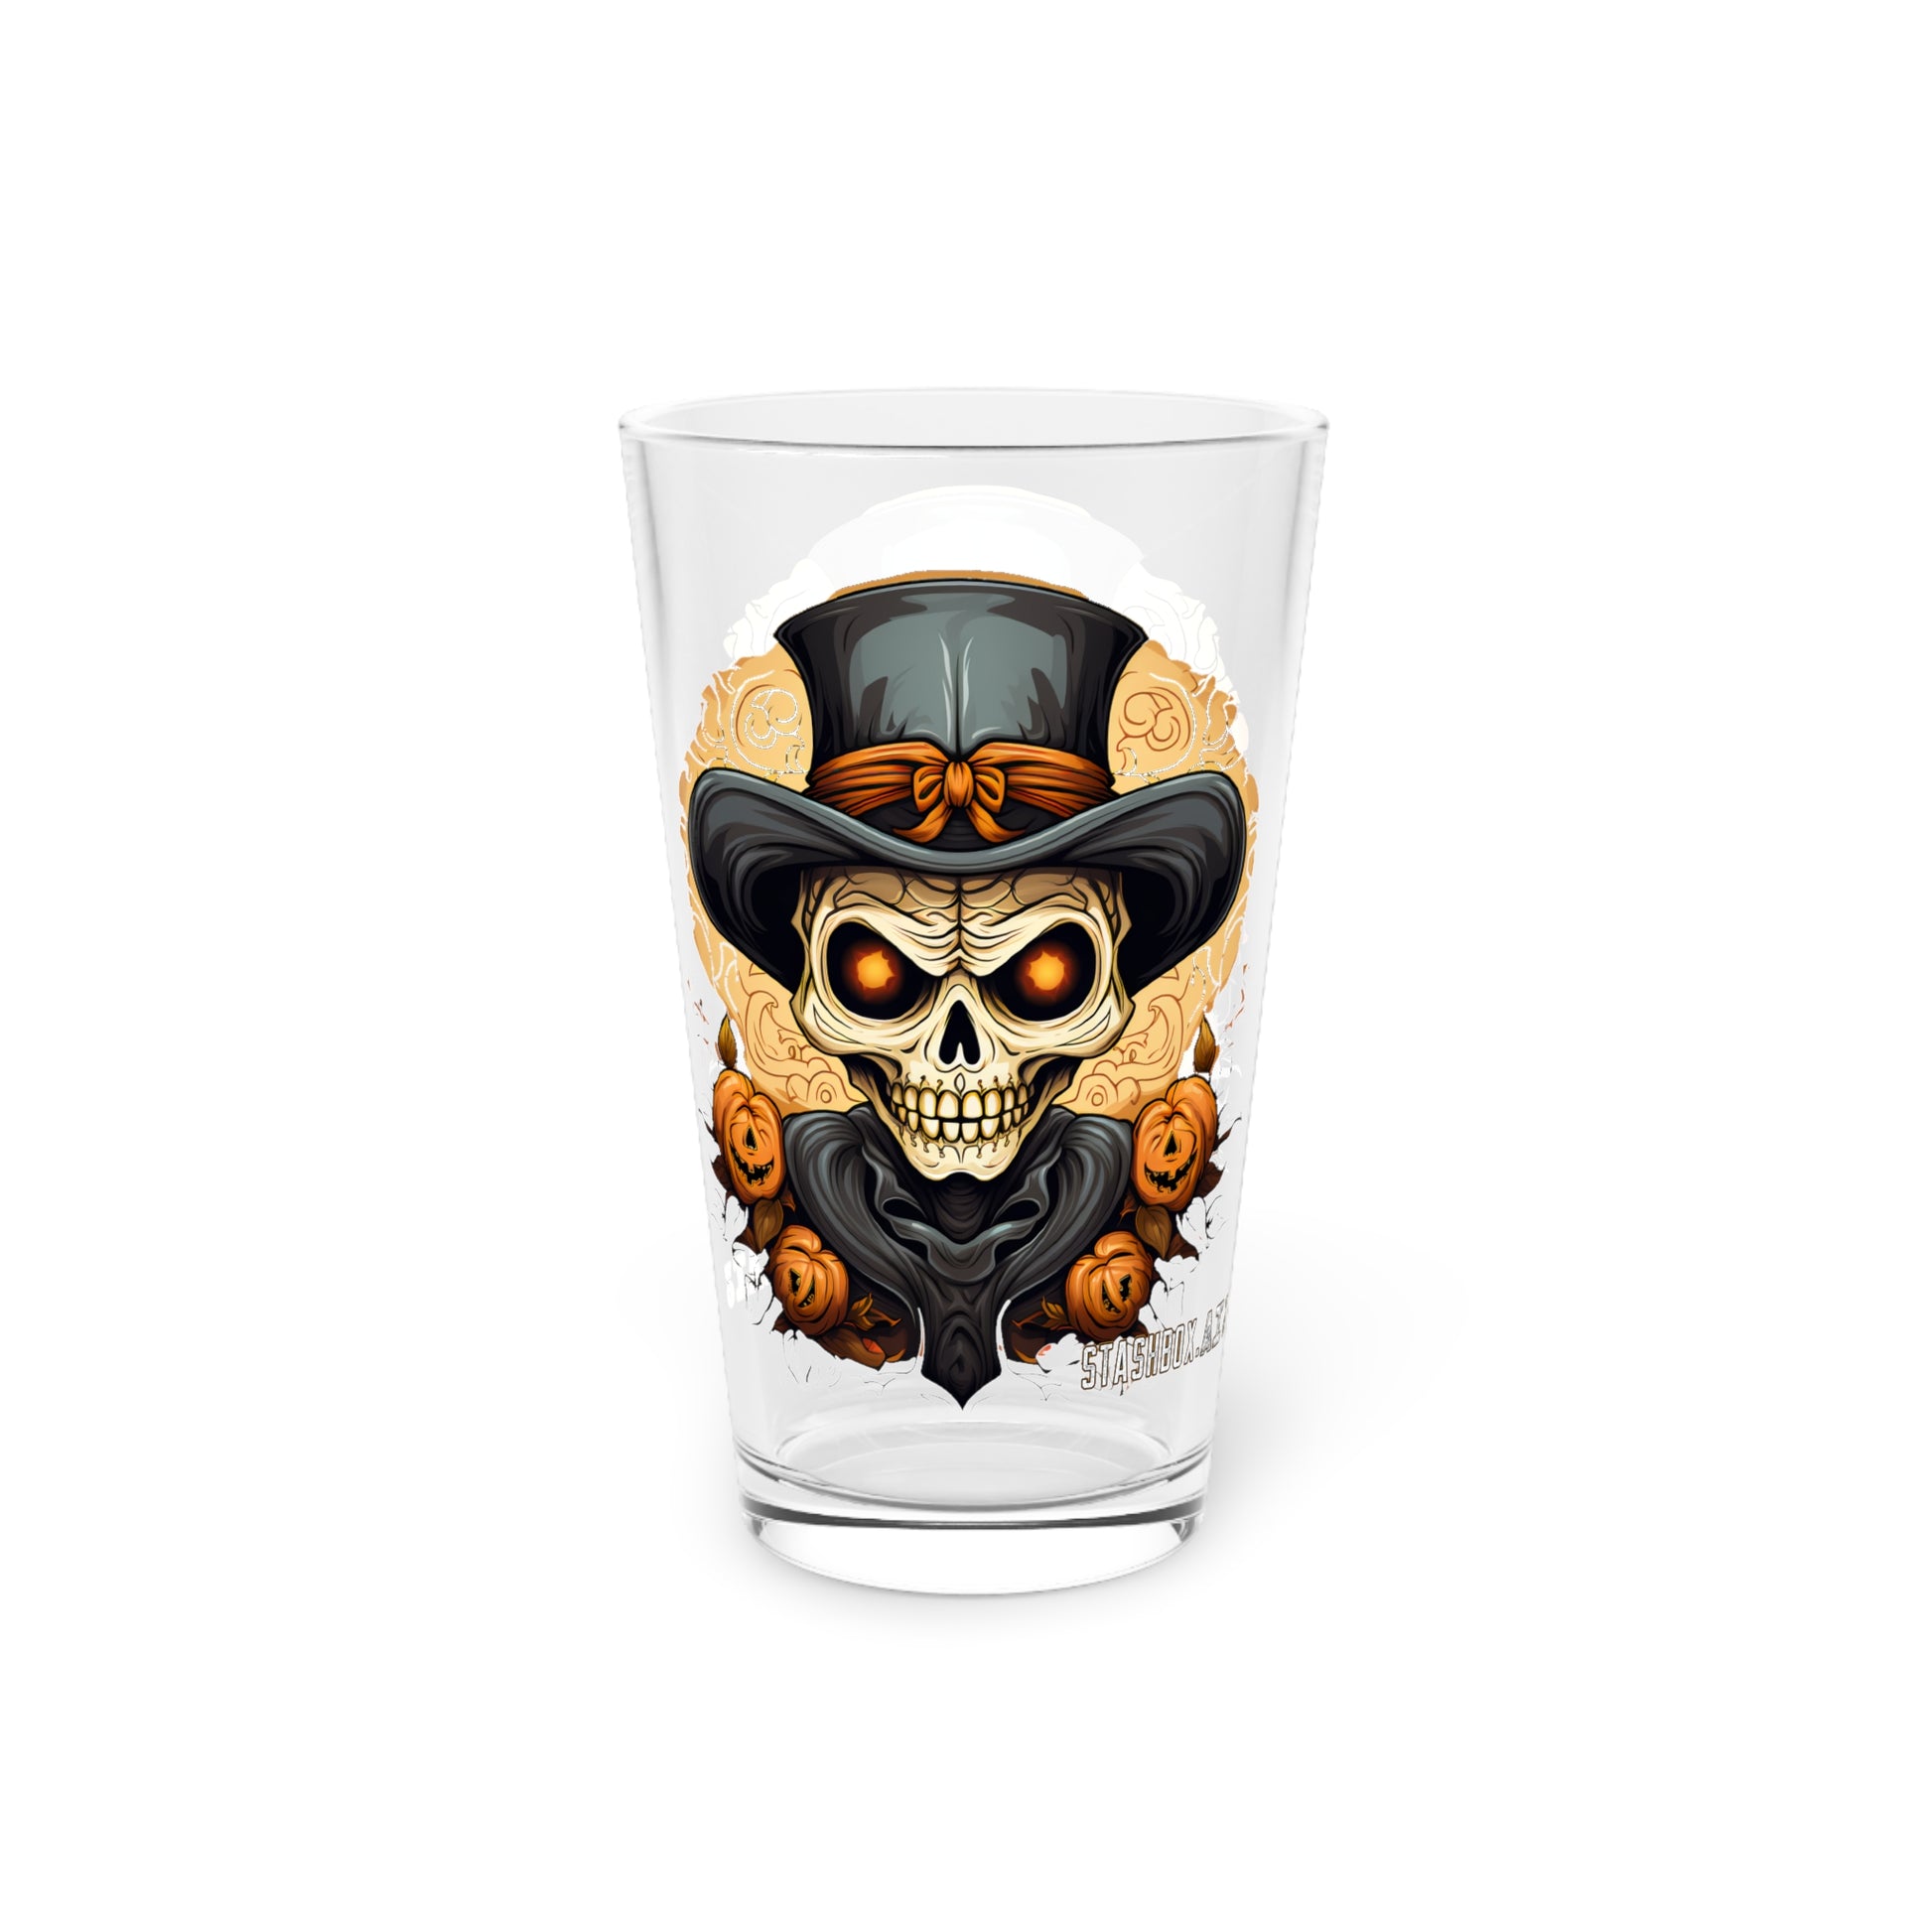 Unveil the spirit of Halloween with our Pint Glass adorned with a Skeleton Head in a top hat. Stashbox Halloween Design #002 brings you detailed character illustrations in the style of clowncore and chicano art fusion. Enjoy the vibrant hues of dark orange and beige, capturing the essence of Halloween monsters. This 16oz glass combines natural and man-made elements, creating an eerie yet captivating ambiance.